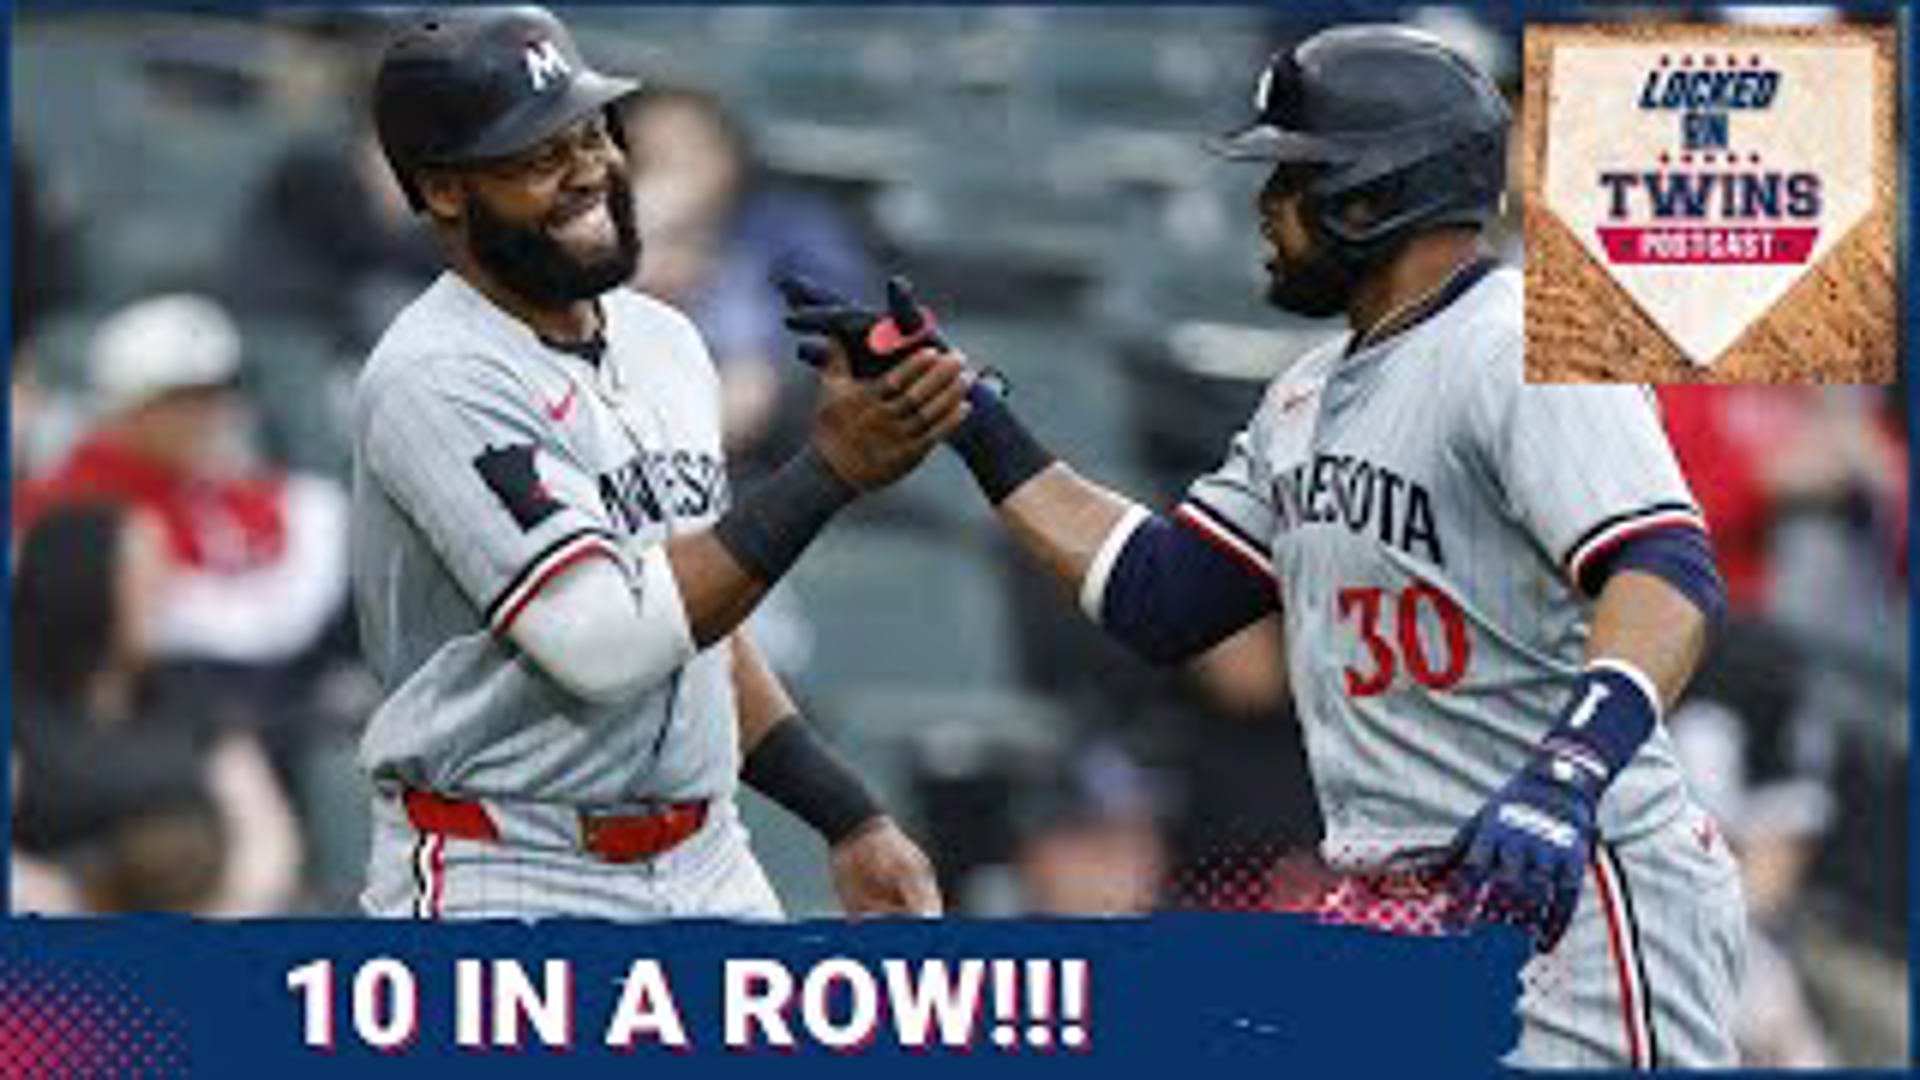 The Minnesota Twins won their tenth game in a row for the first time since 2008. Join Luke Inman and Sam Ekstrom for the entire breakdown and in-depth analysis.